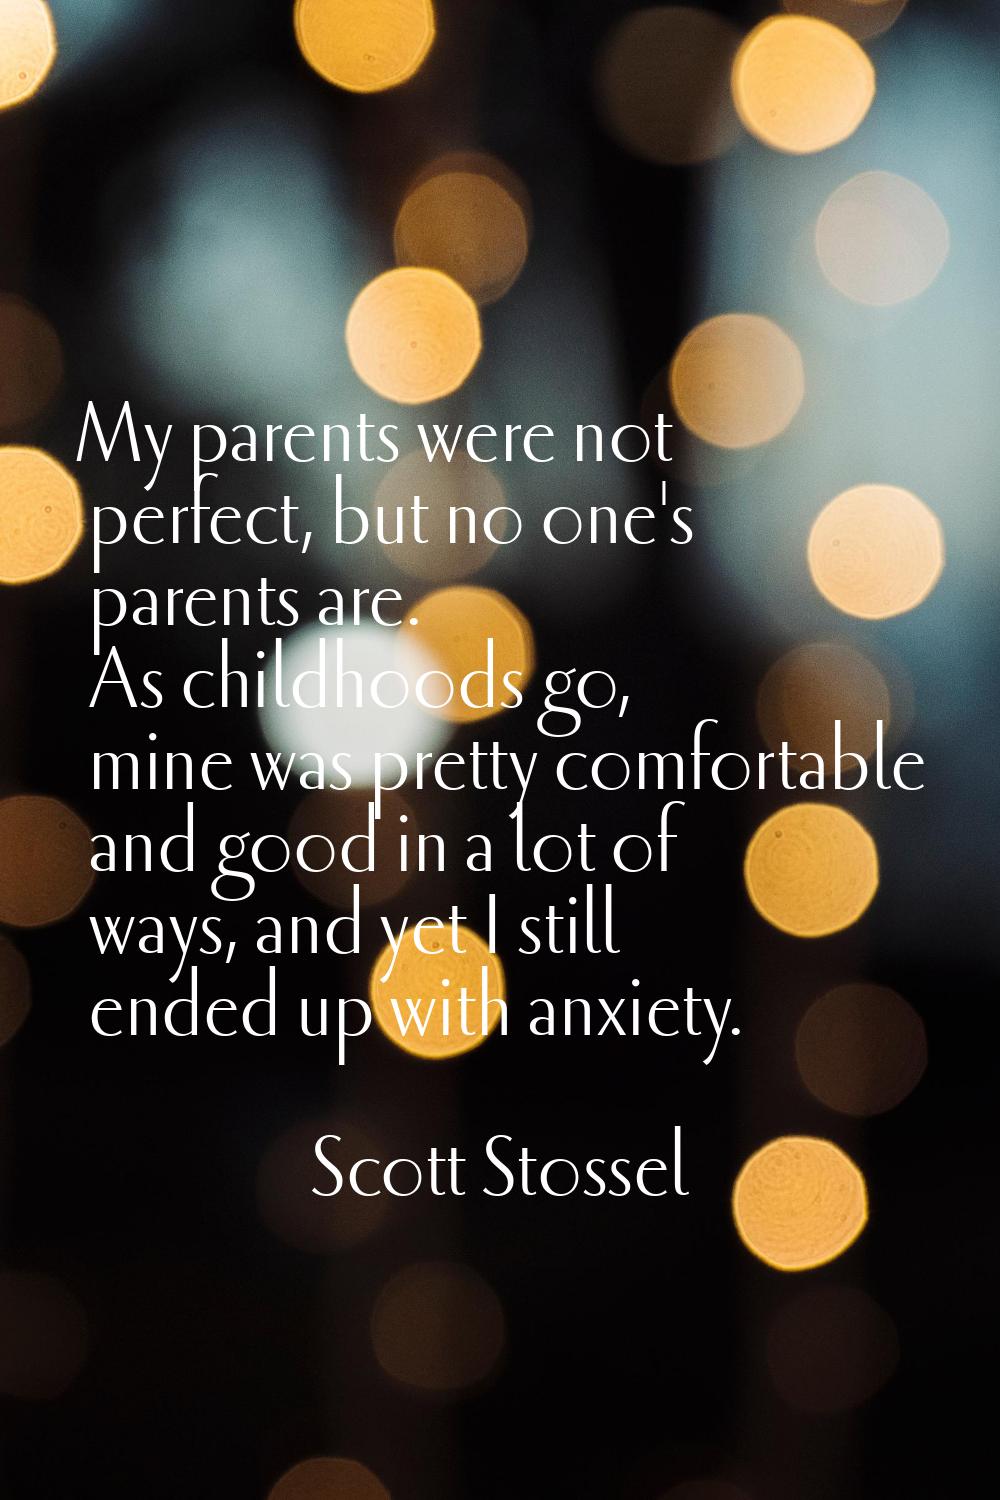 My parents were not perfect, but no one's parents are. As childhoods go, mine was pretty comfortabl